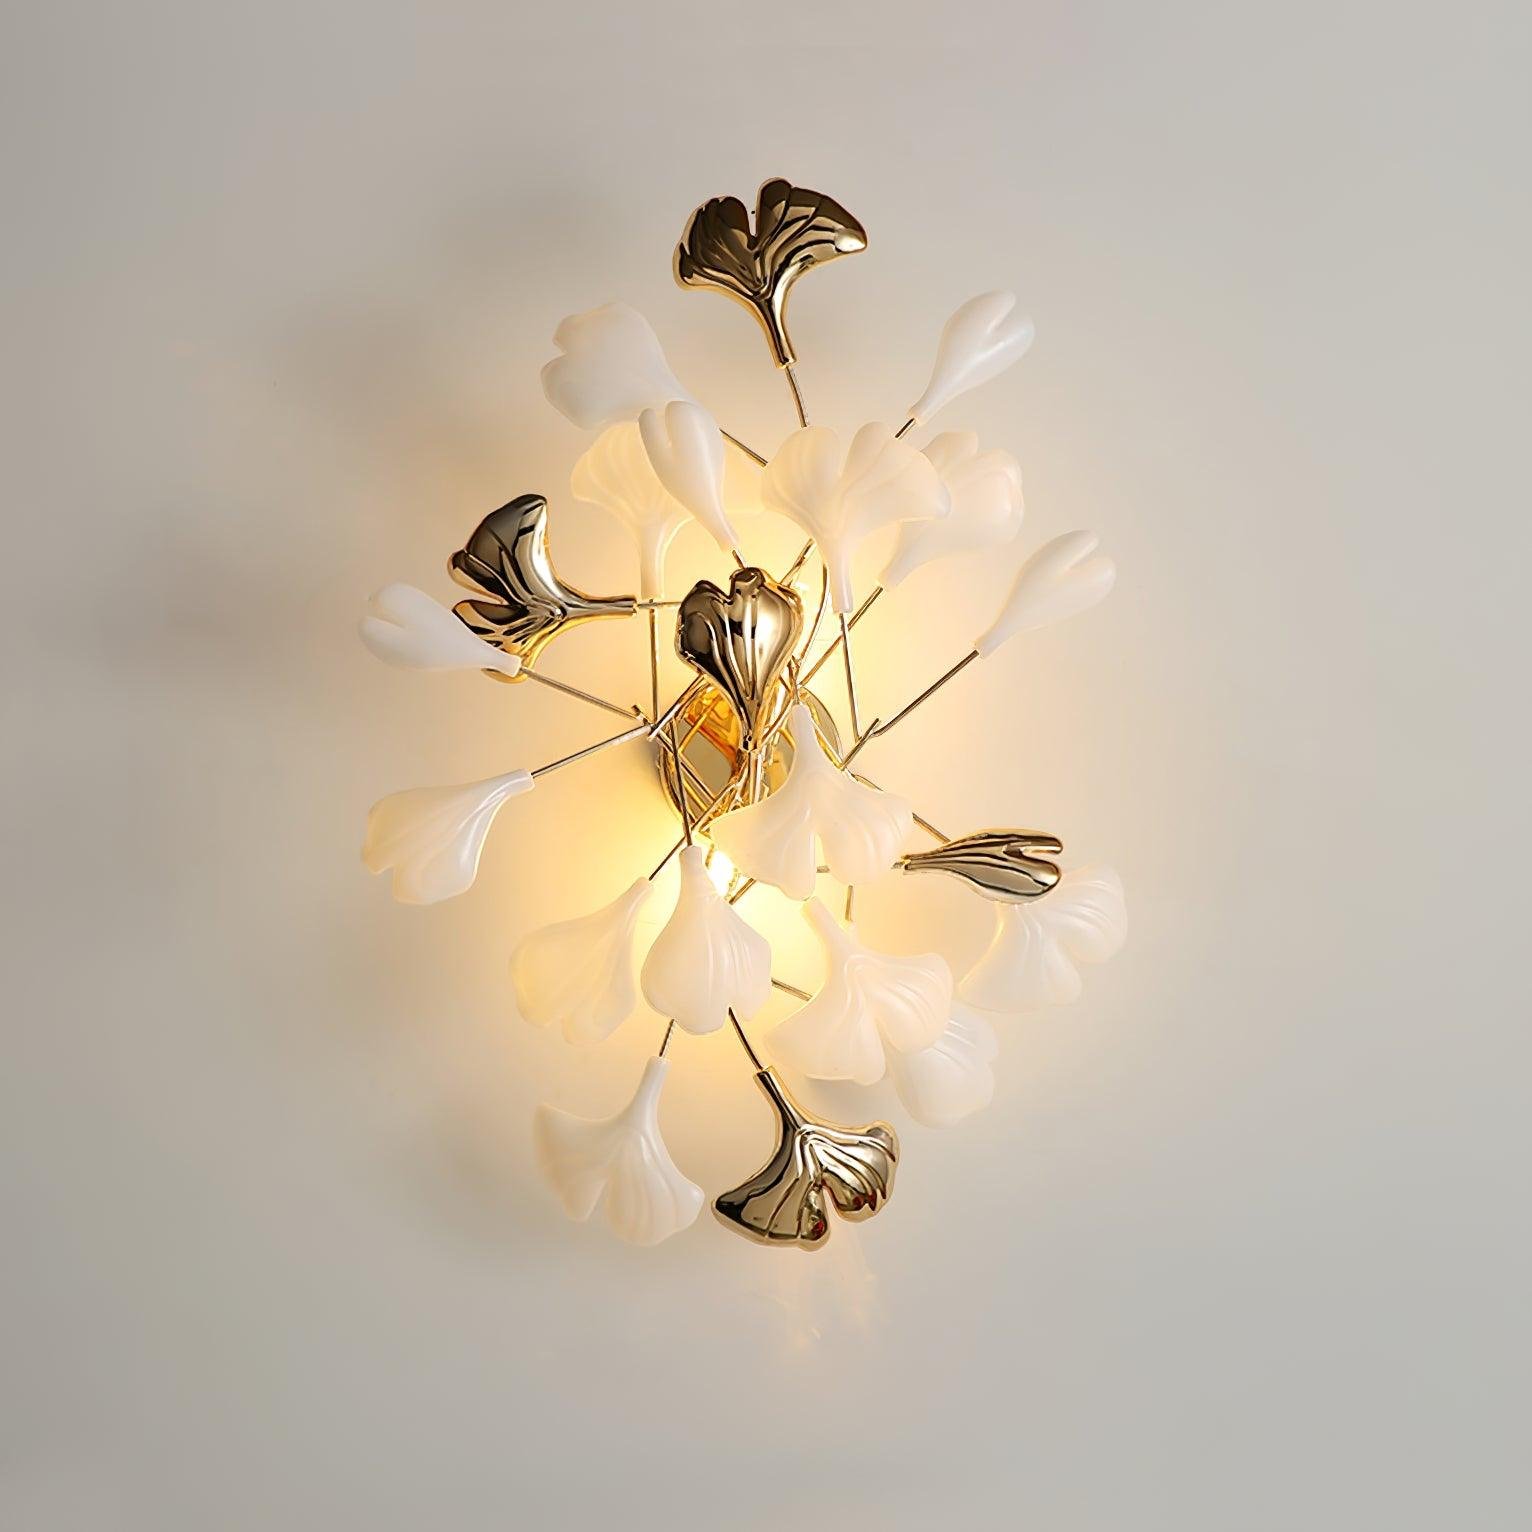 Wall Lamp with Gingko Design, 15.7" Diameter x 23.6" Height, 40cm Diameter x 60cm Height, Gold and White Color